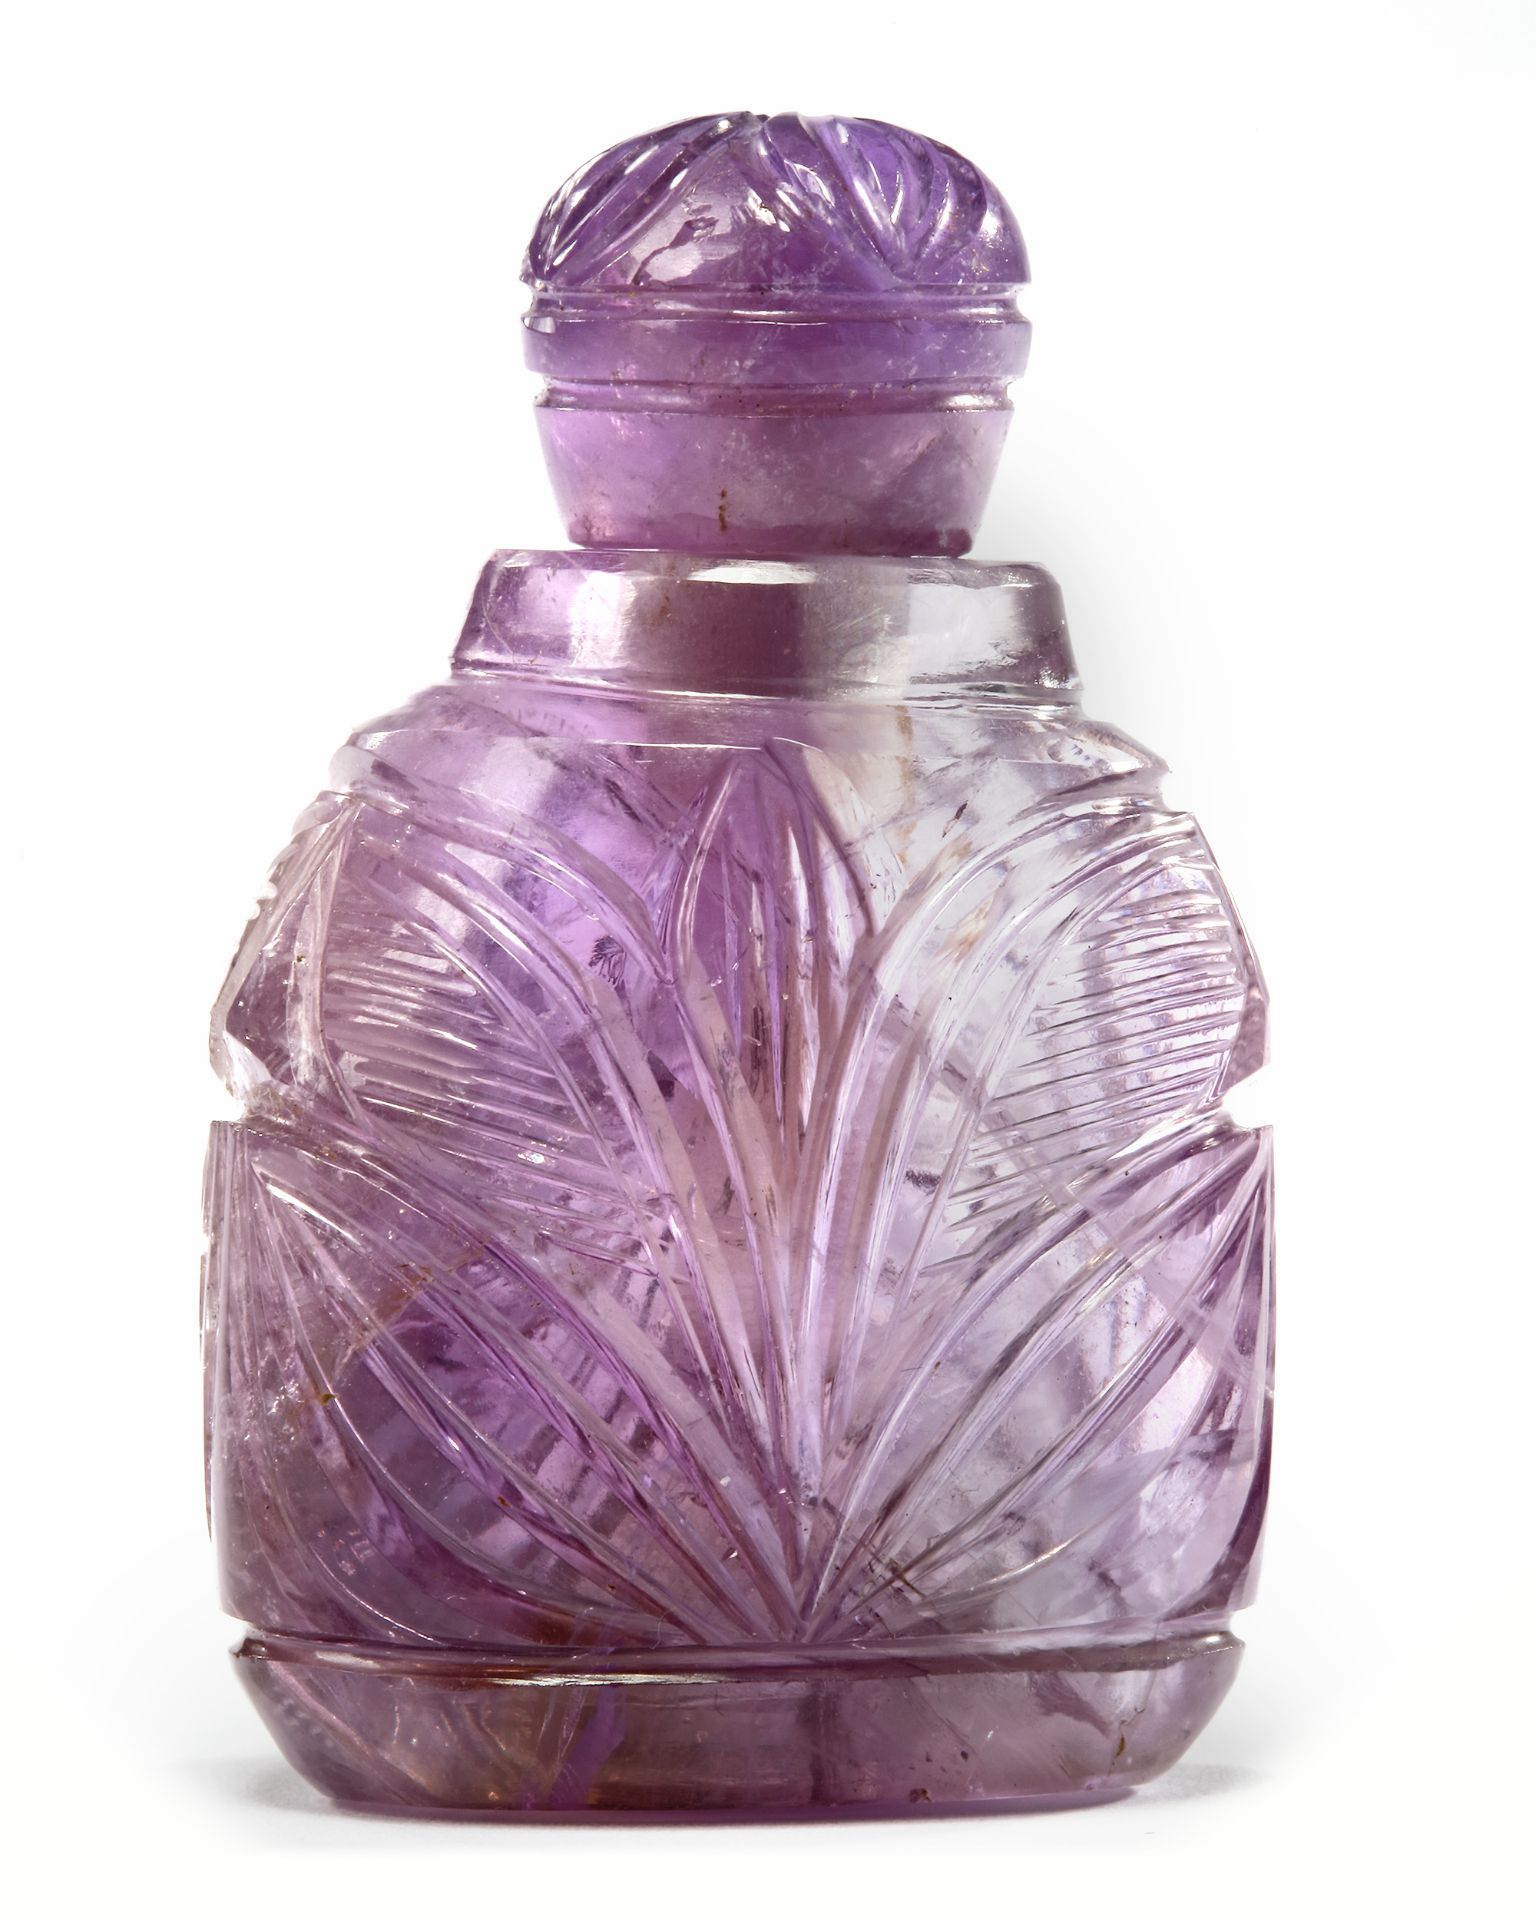 A CARVED AMETHYST FLASK WITH STOPPER, INDIA, LATE 19TH CENTURY